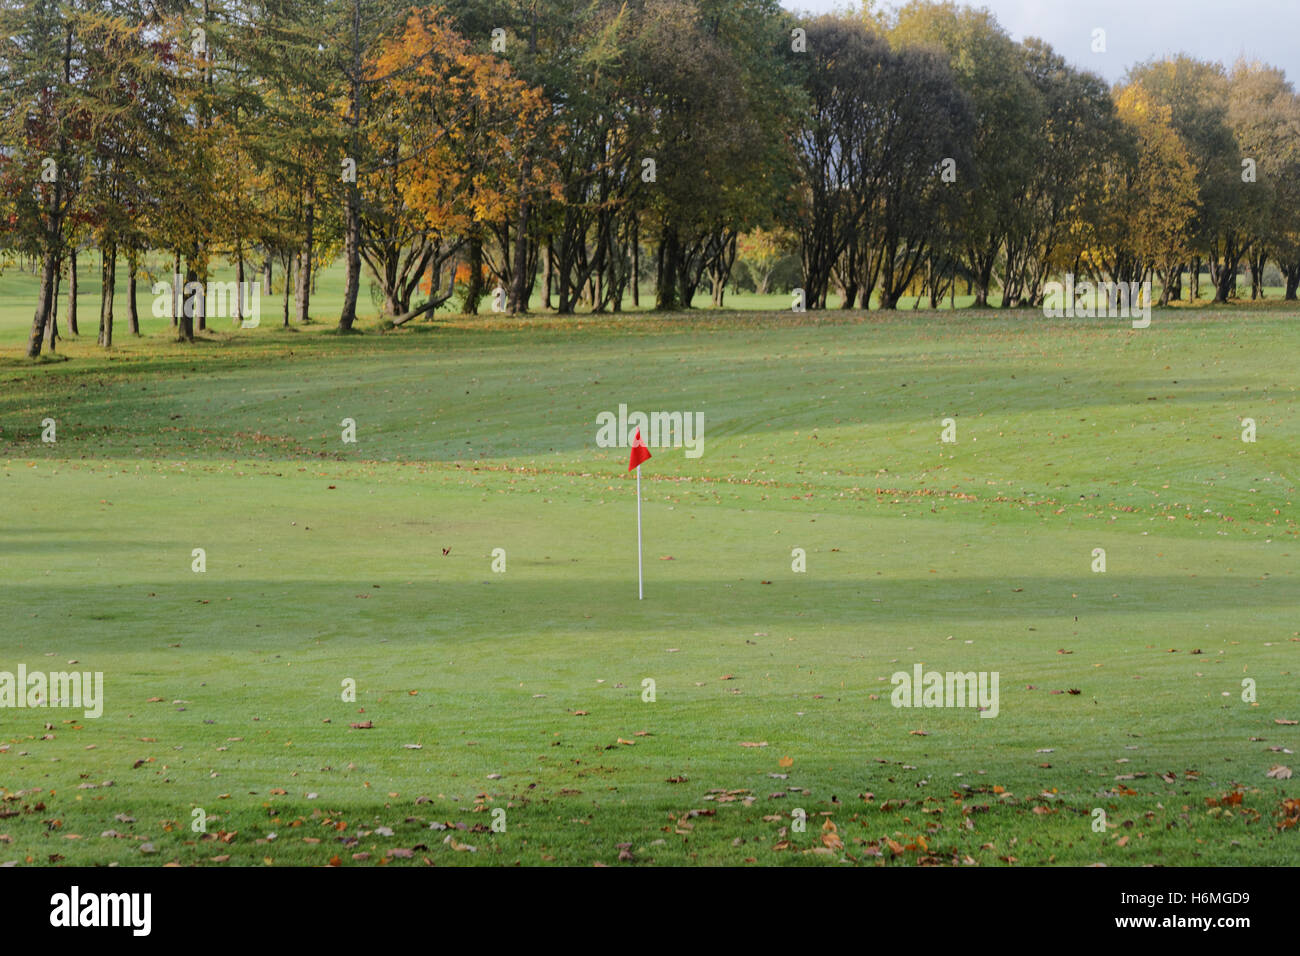 Glasgow district council knightswood golf course Red flag on golf course 18th hole or last hole on the 9 hole course   green perspective Stock Photo